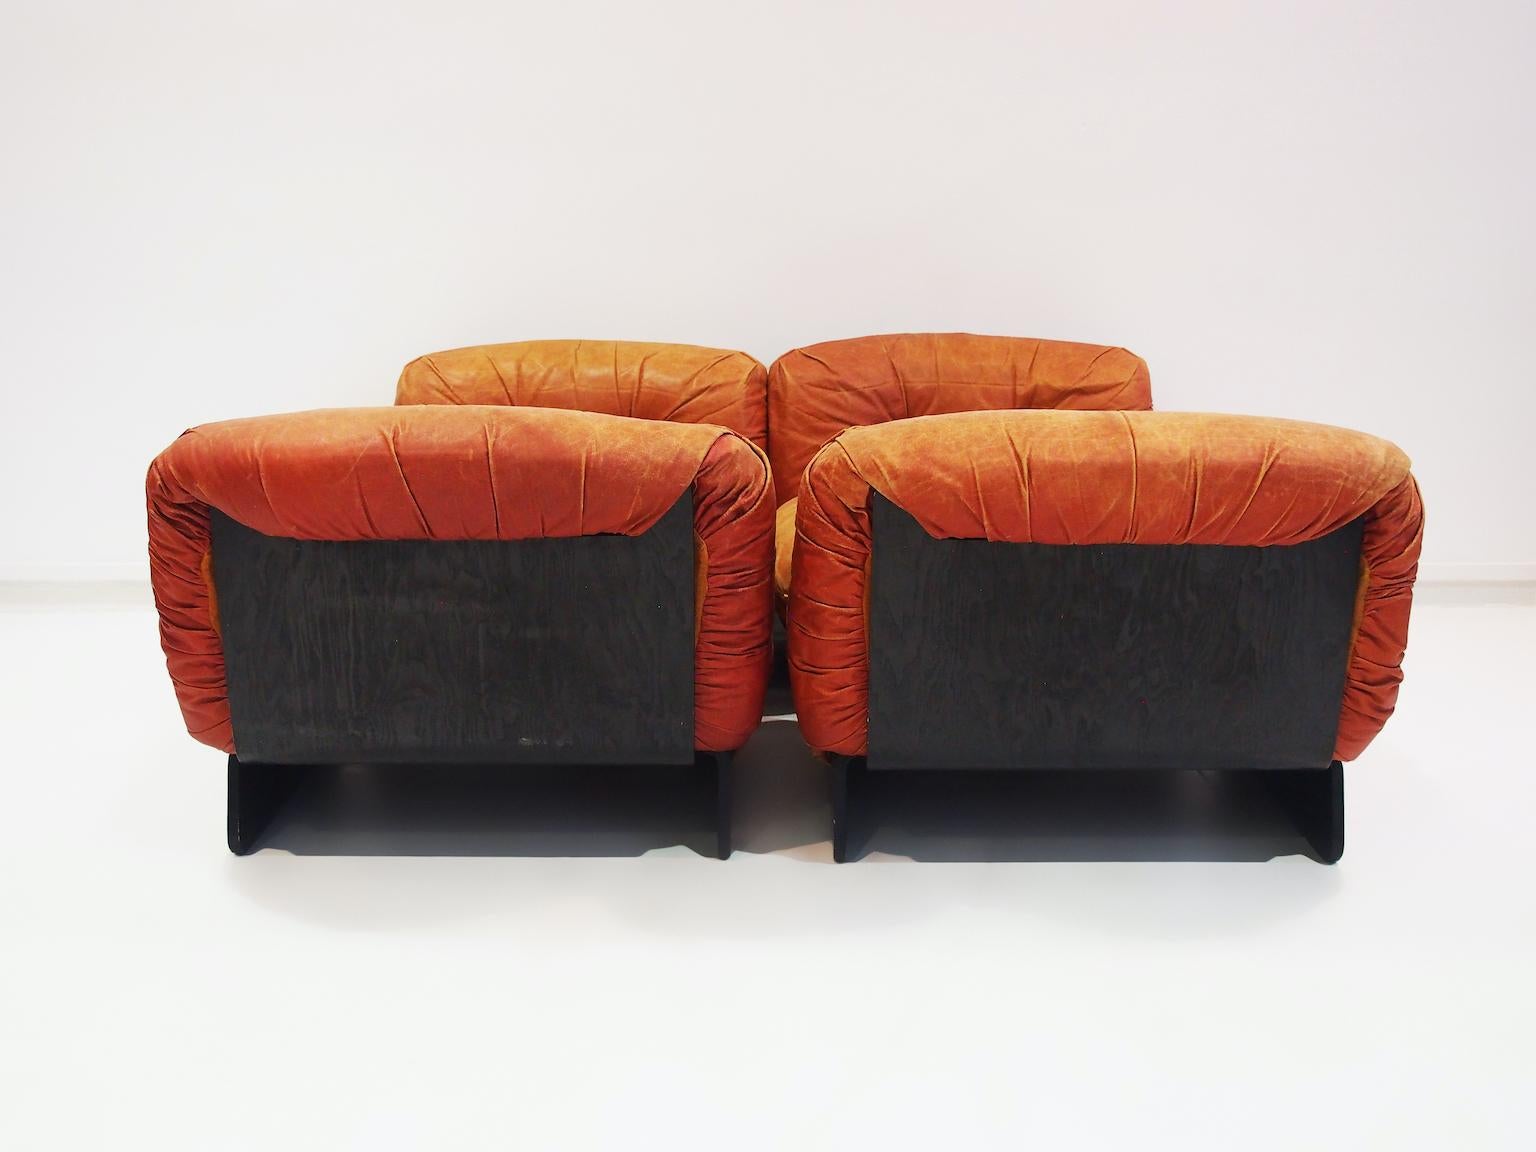 Set of Four Giuseppe Munari Modular Lounge Chairs Upholstered in Cognac Leather For Sale 1